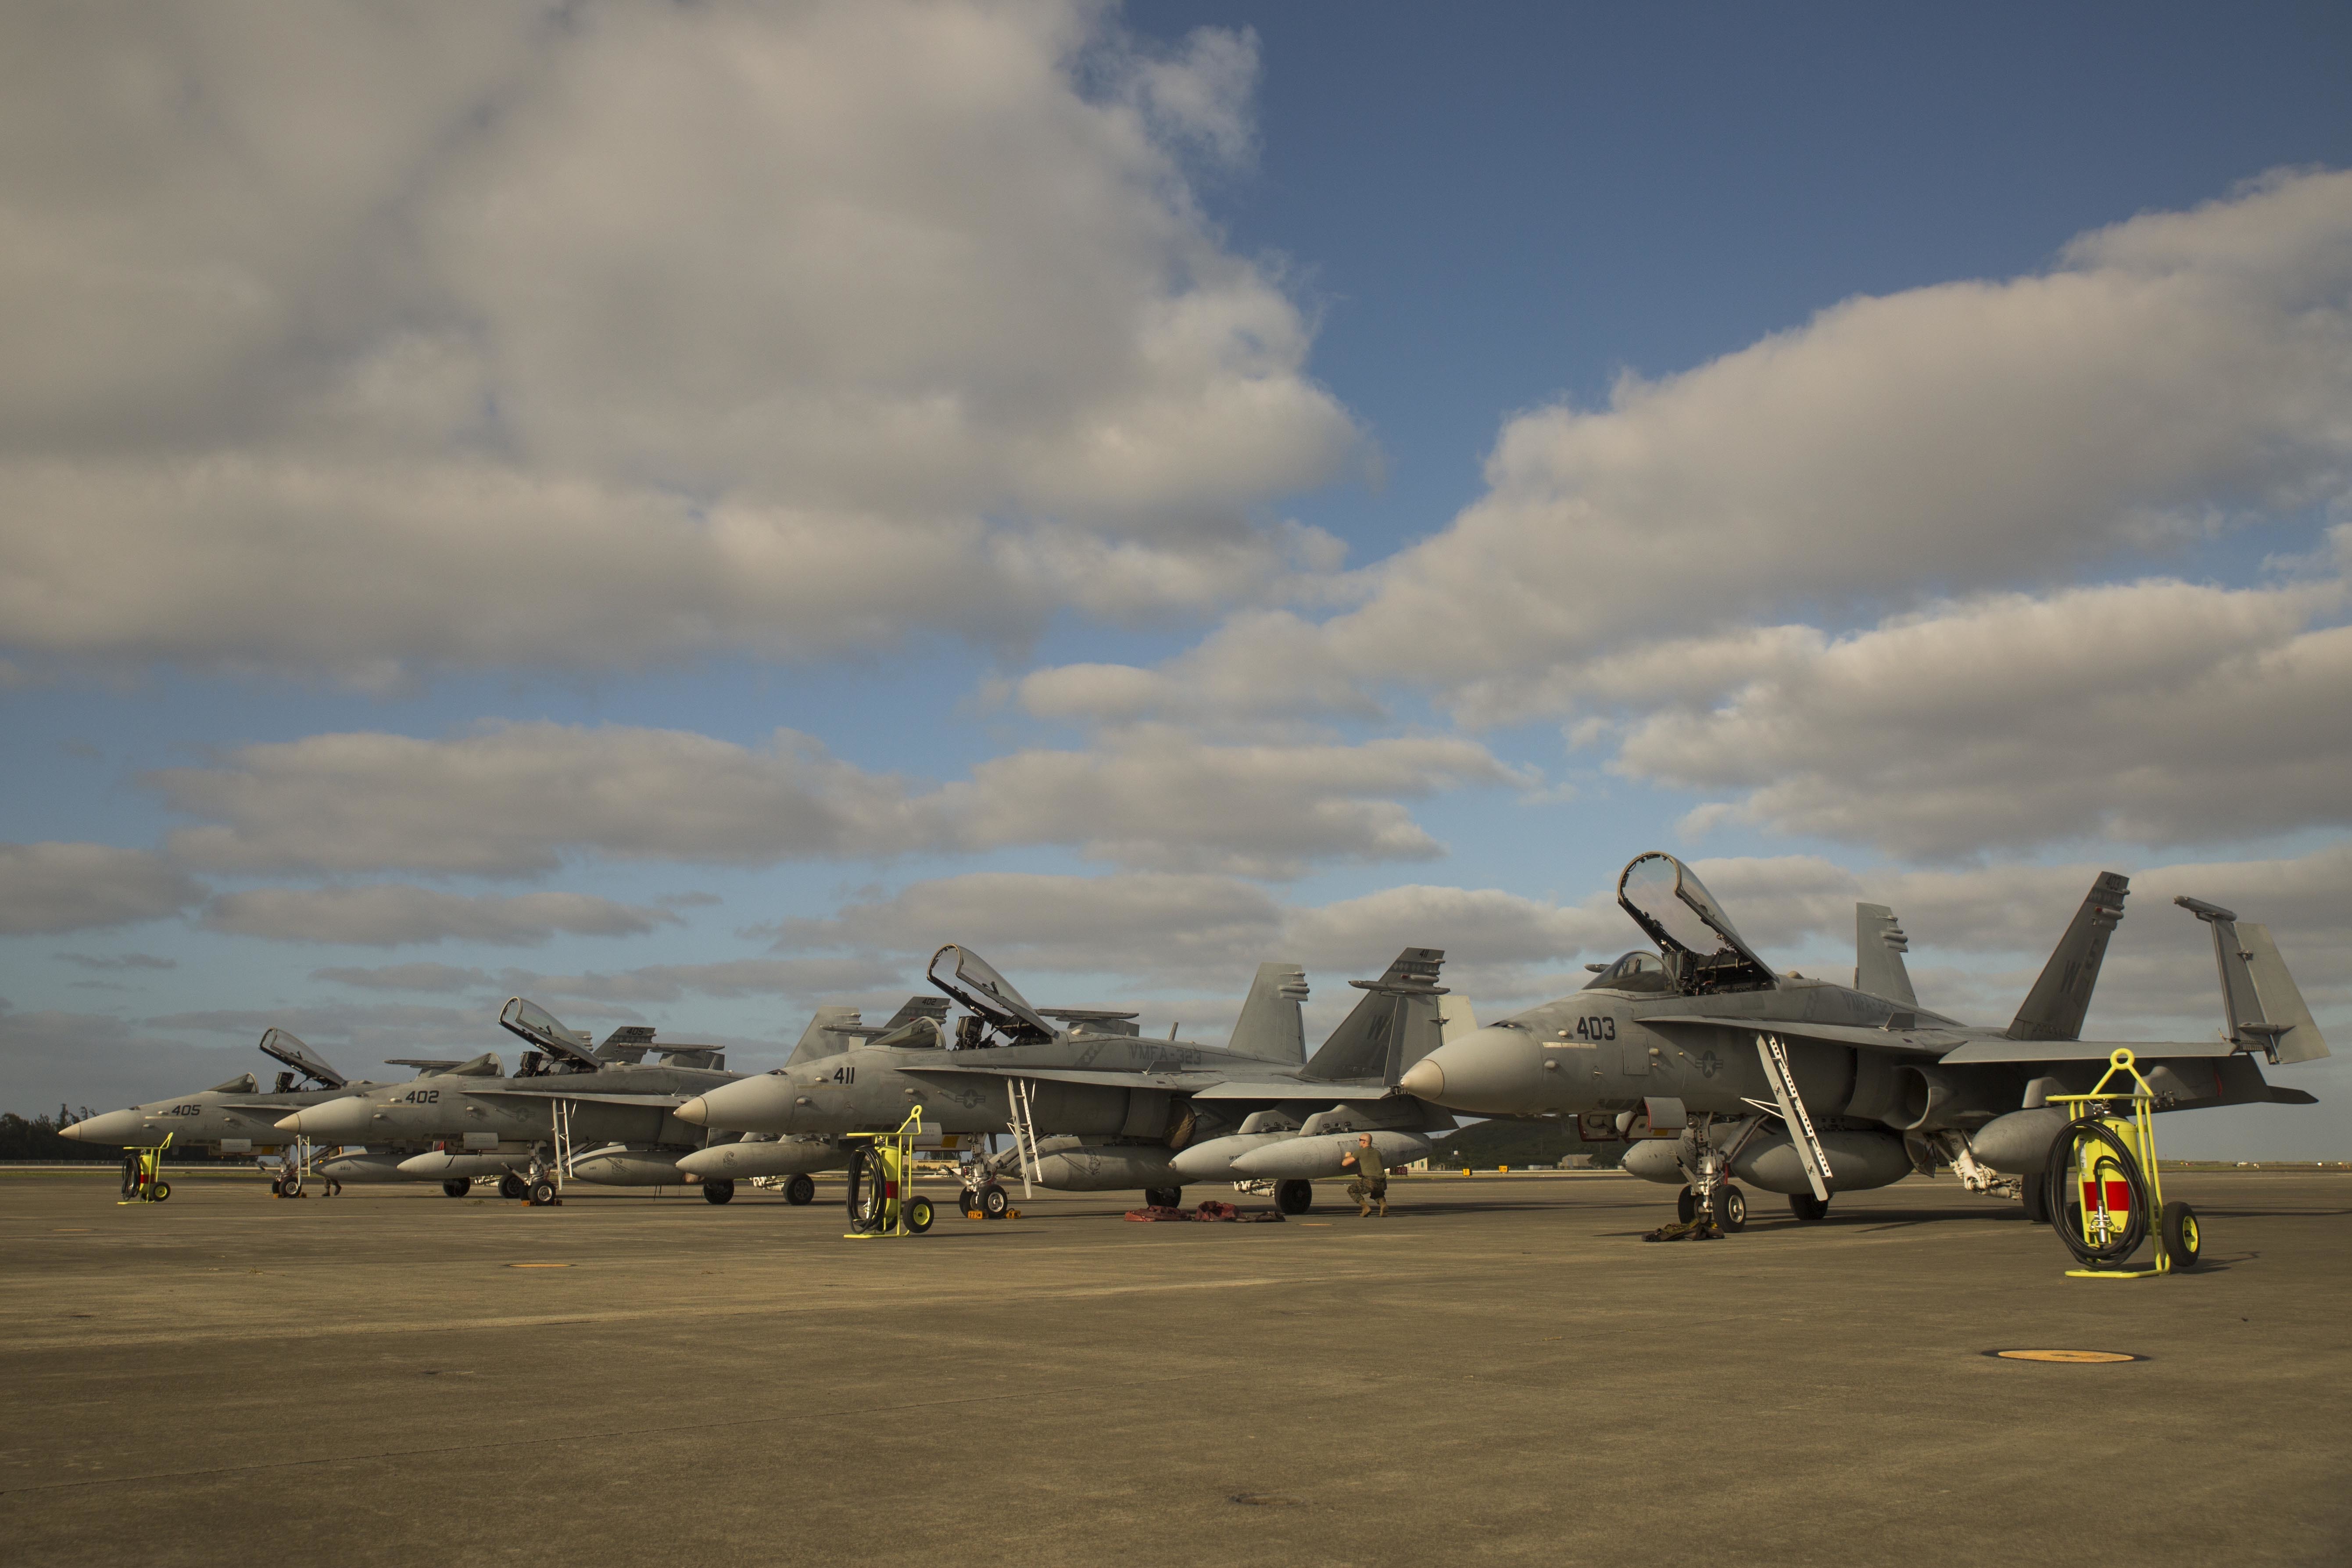 A Marine inspects an F/A-18C Hornet from Marine Fighter Attack Squadron 323, Jan. 7, 2015. US Marine Corps photo.